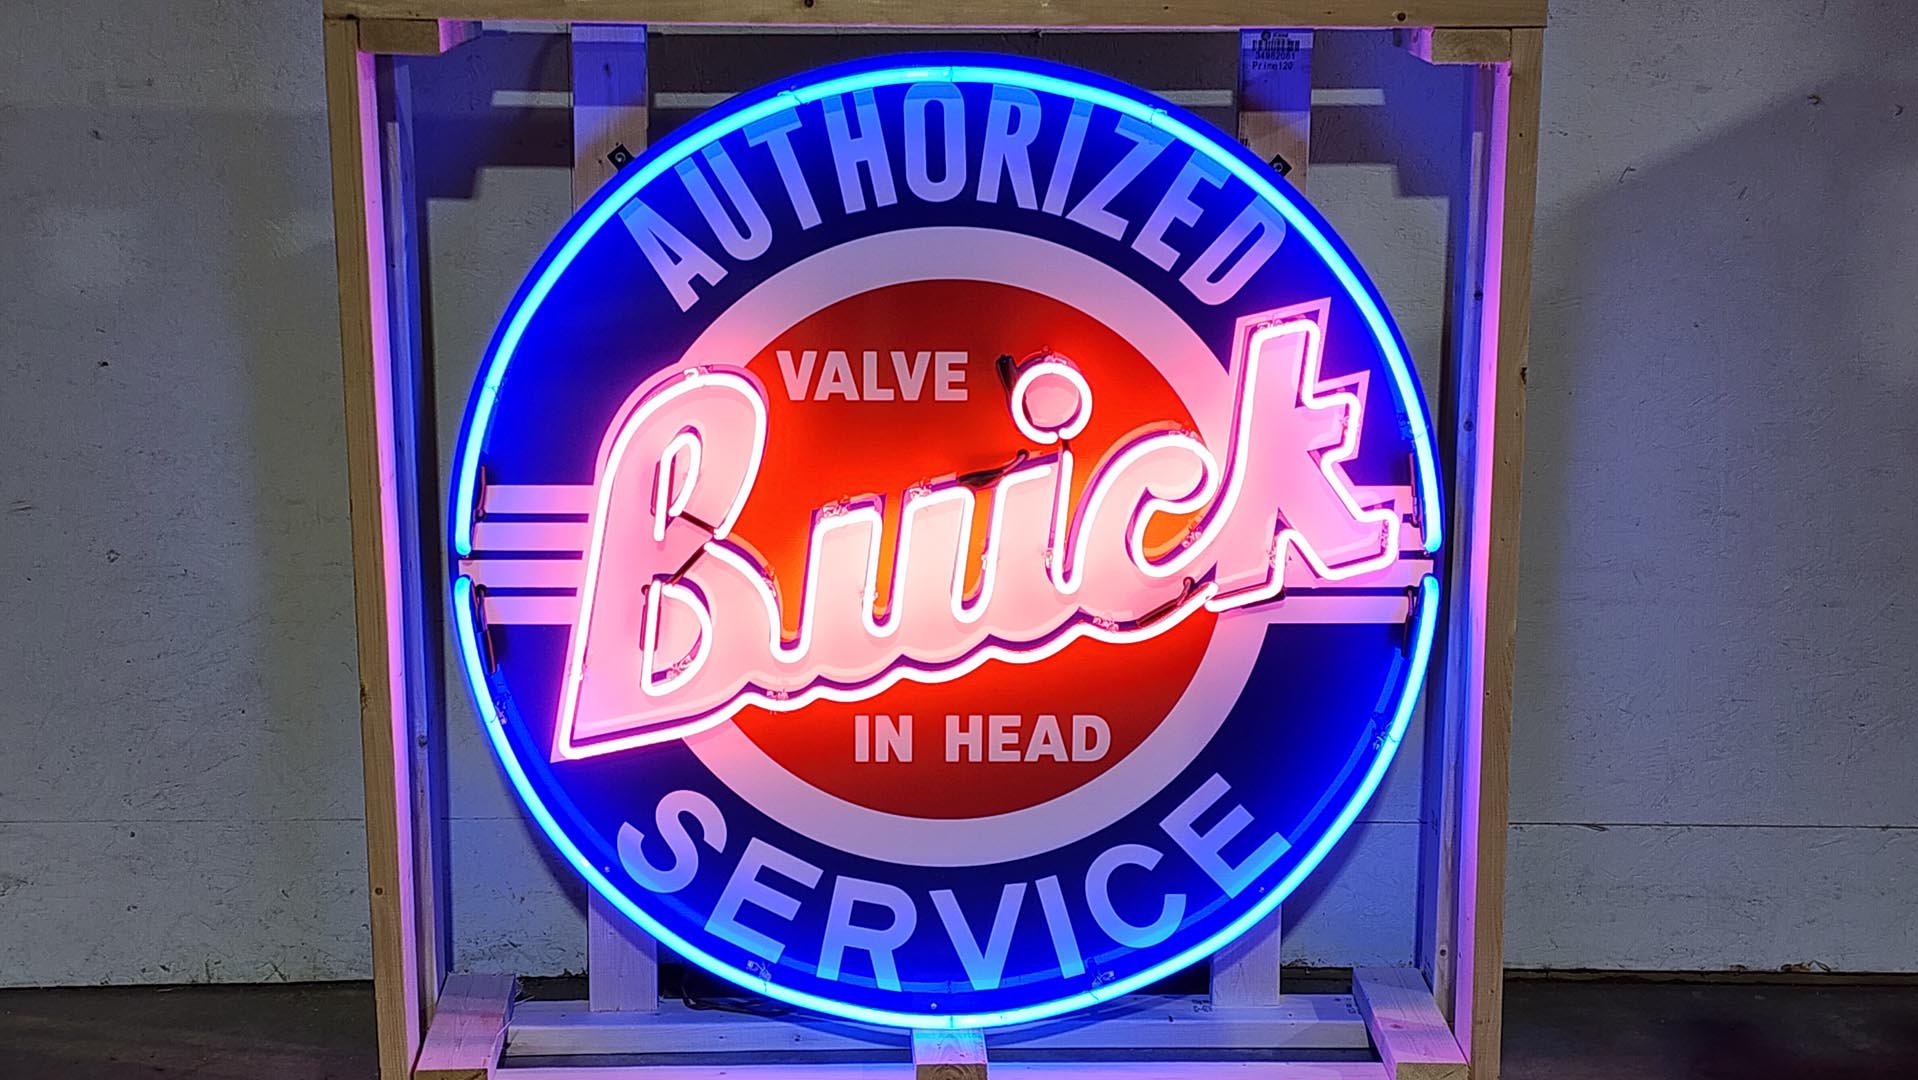  Custom Buick Authorized Servic e Neon Lighted Sign 